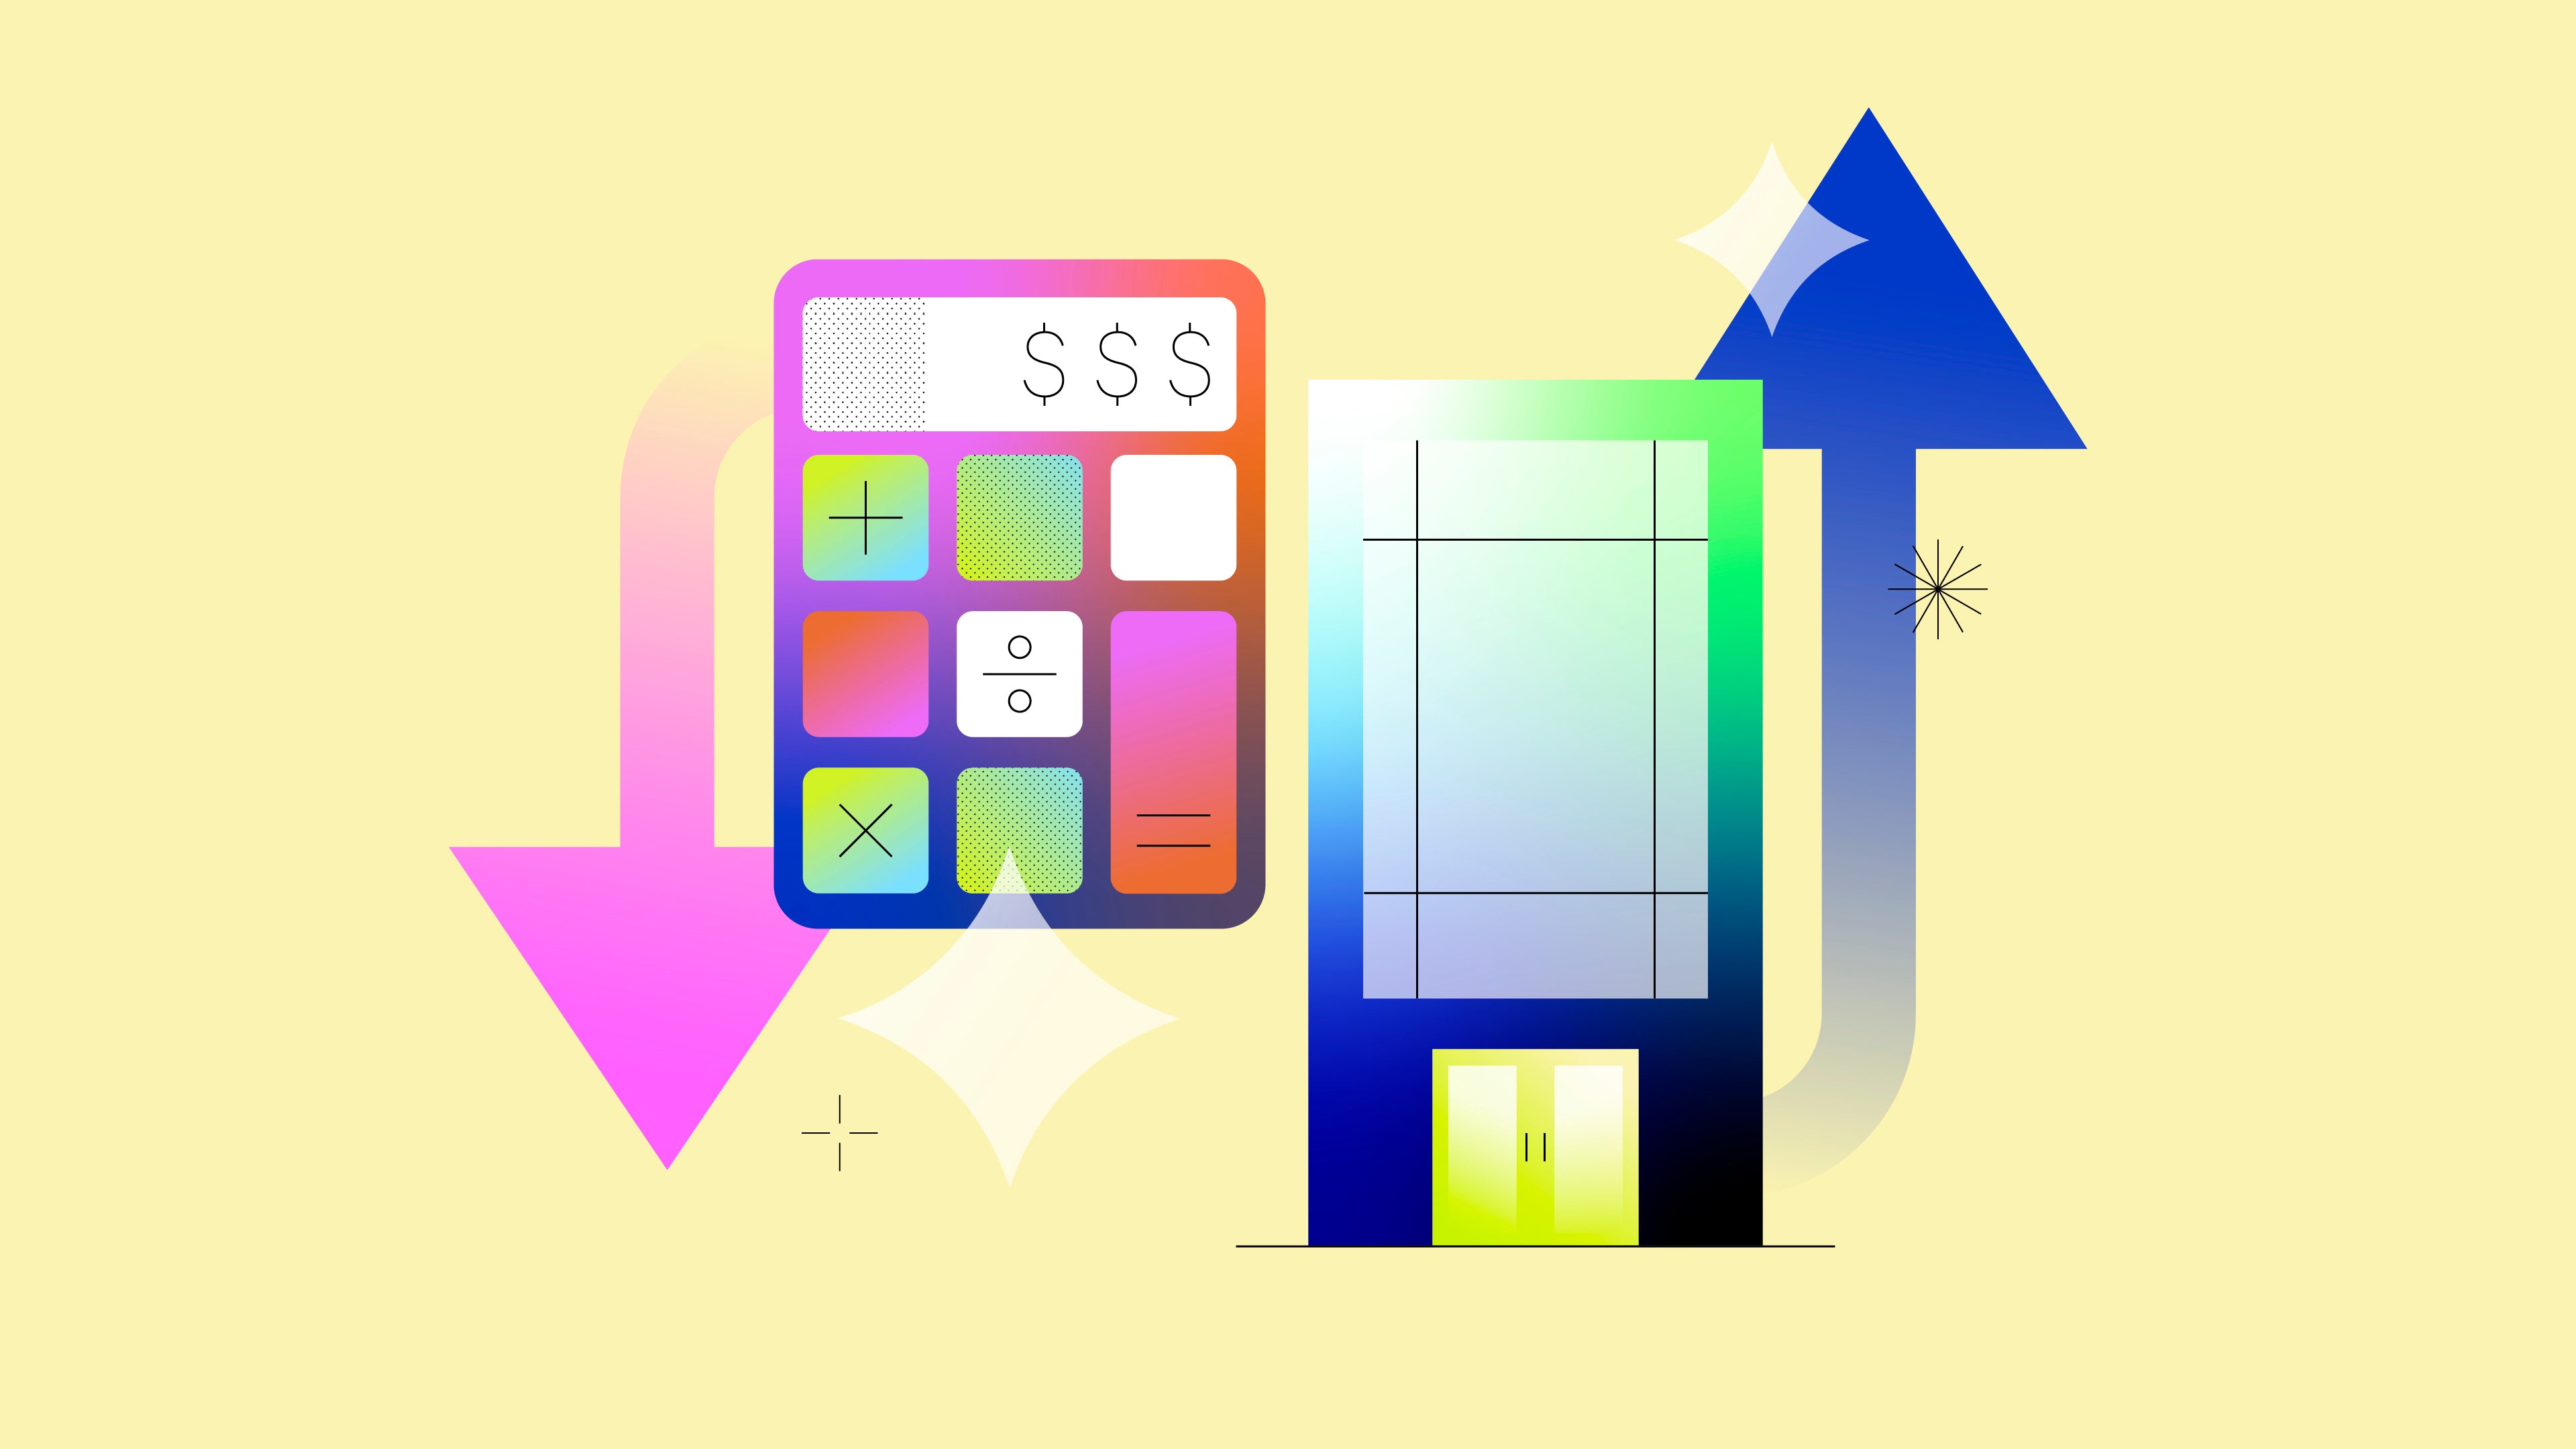 Illustration of a calculator with a downward arrow and building with an upward arrow on a yellow background.